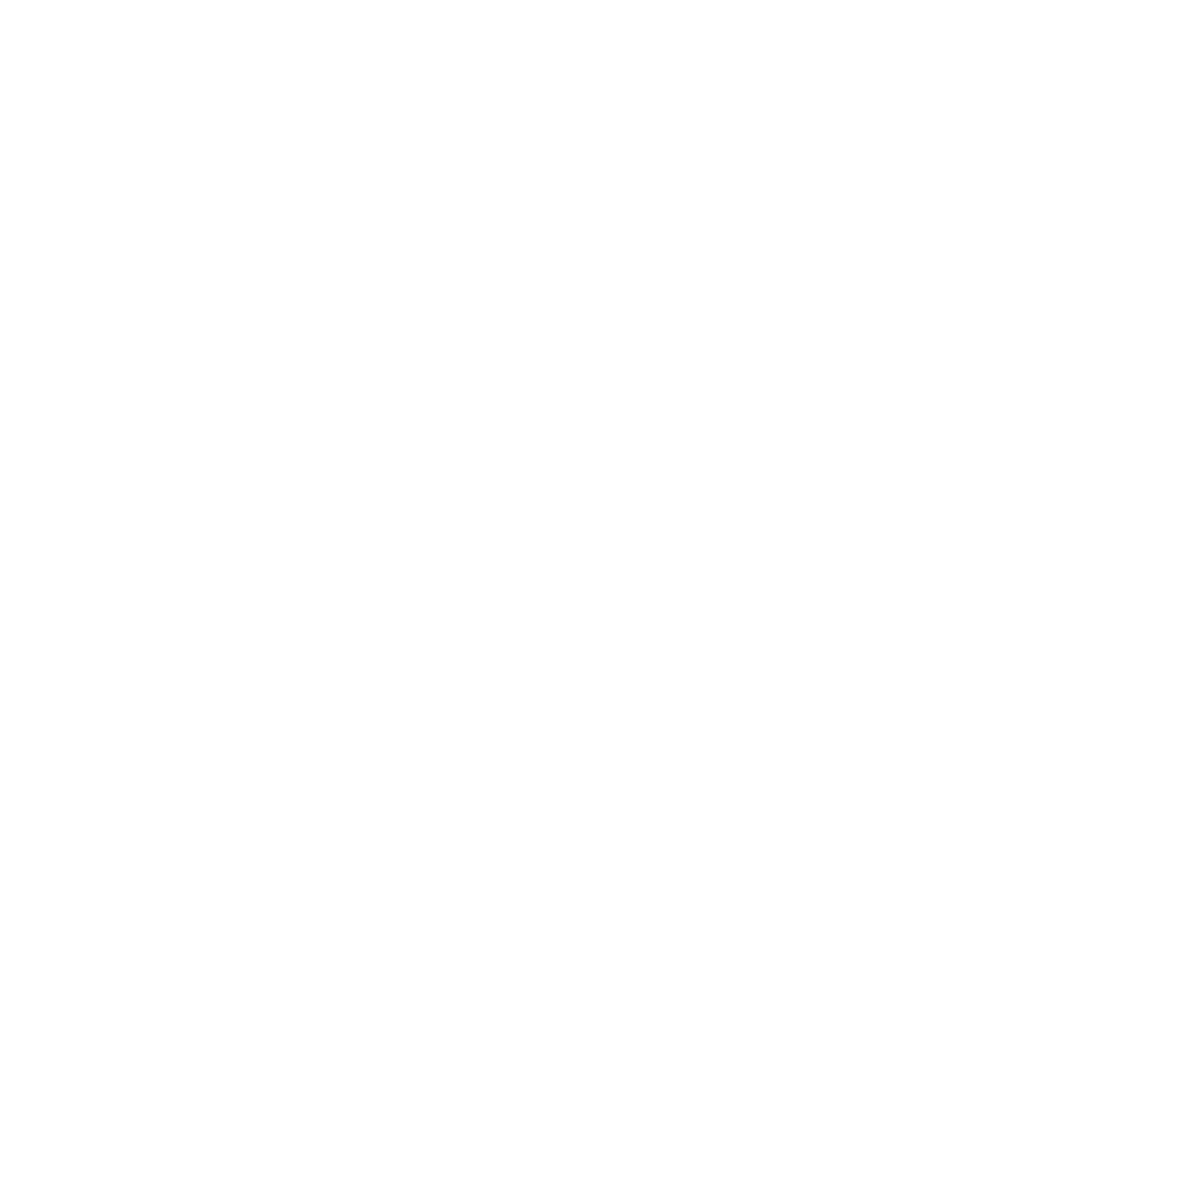 An icon for a capitol building dome